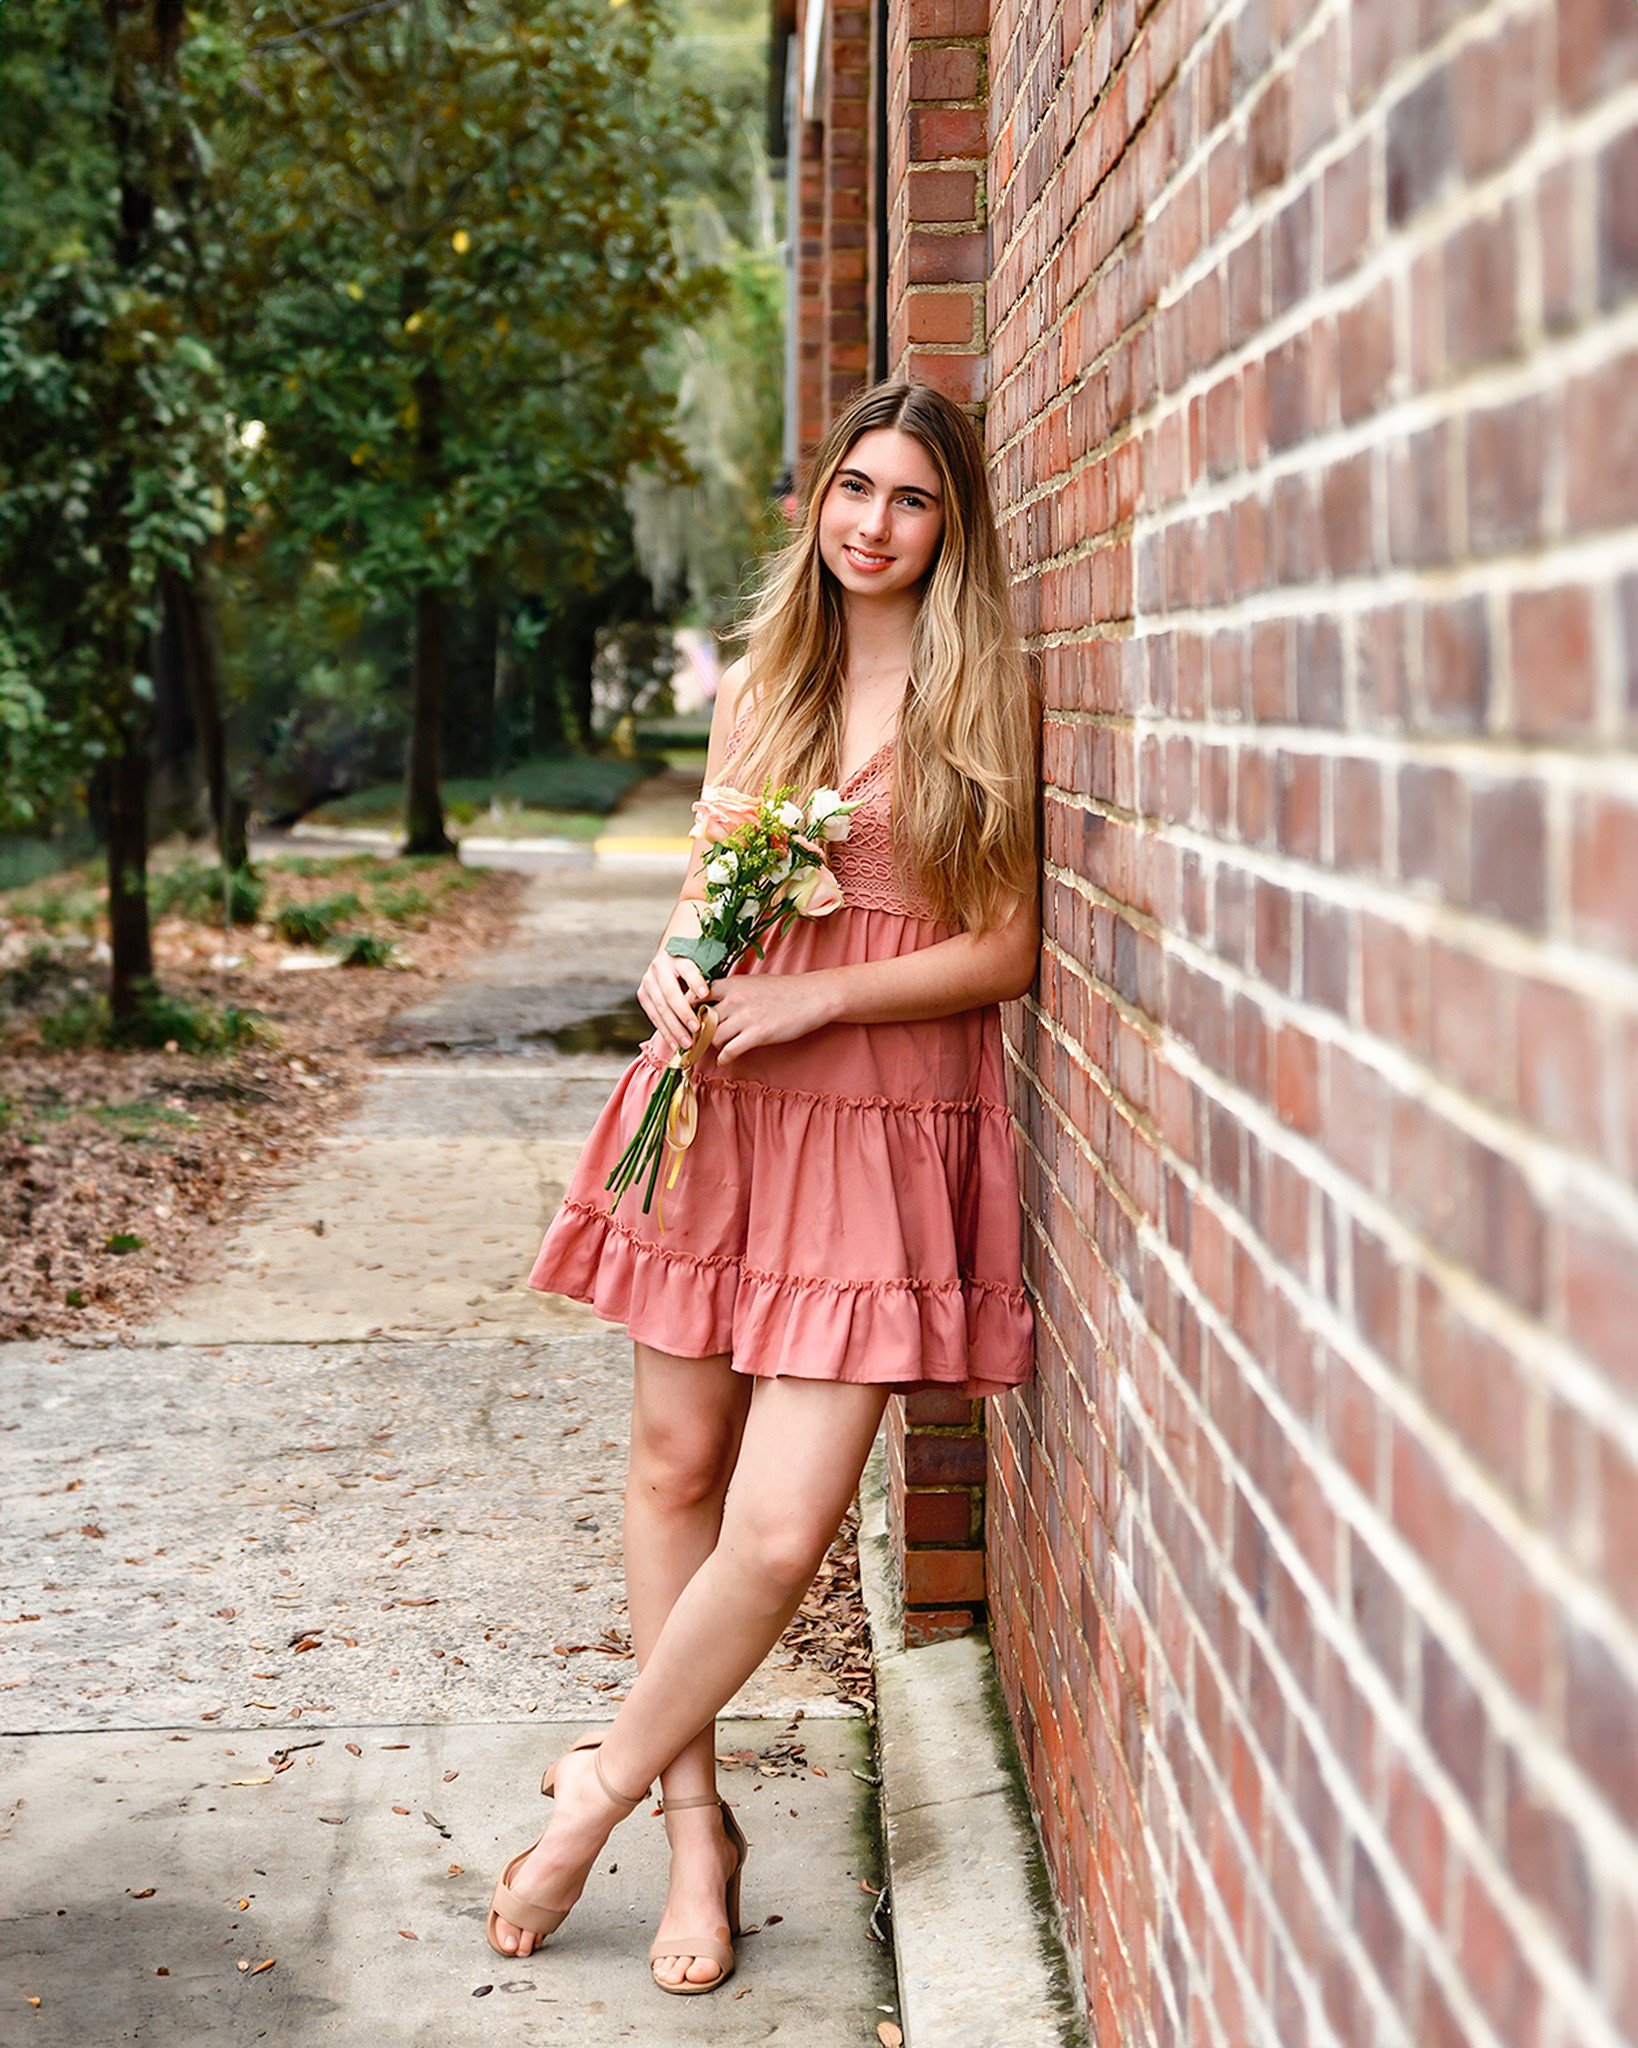 🌟 Marissa 🌟 Class of 2024 ... There's still time to book your Spring Senior 🎓 Sessions 📸! Let's chat! 

#KaylaFurmanPhotography #saintaugustinephotographer #staugustinephotographer #staugustinefamilyphotographer #veteranowned #staugustinemoms #no